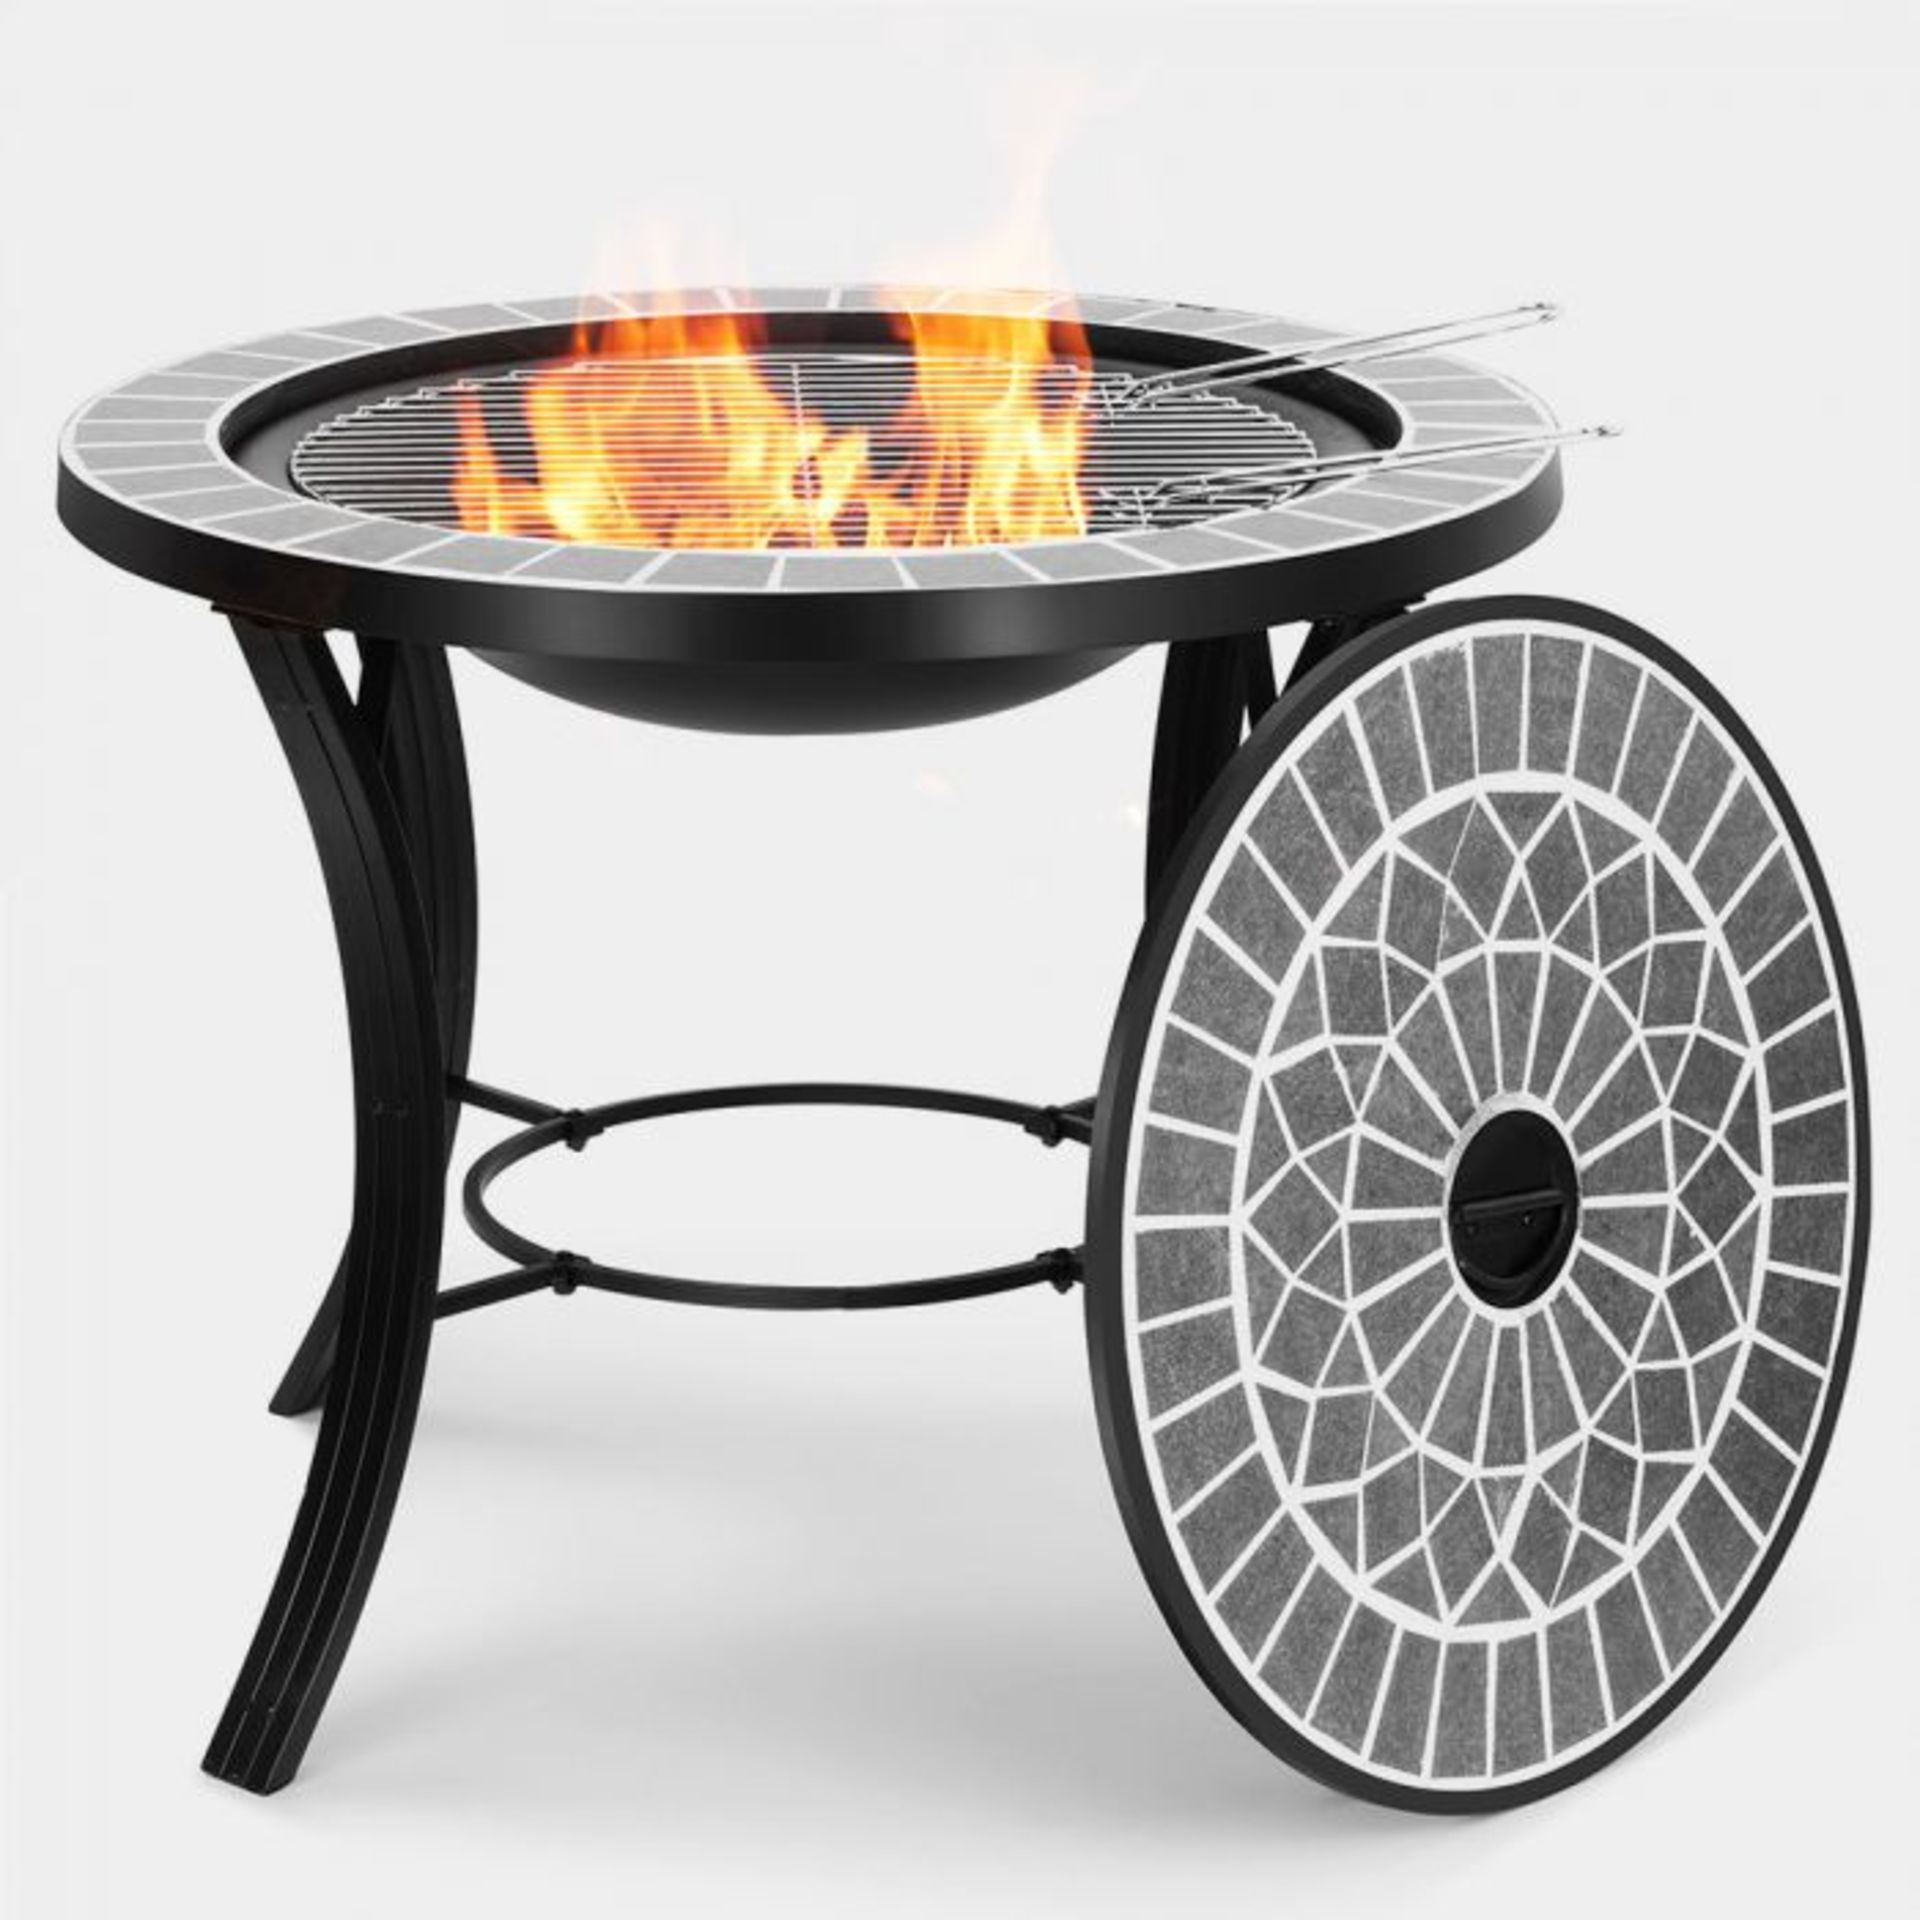 Dark Grey Mosaic Fire Pit. Bring traditional, rustic style to your space, as well as cosy warmth,